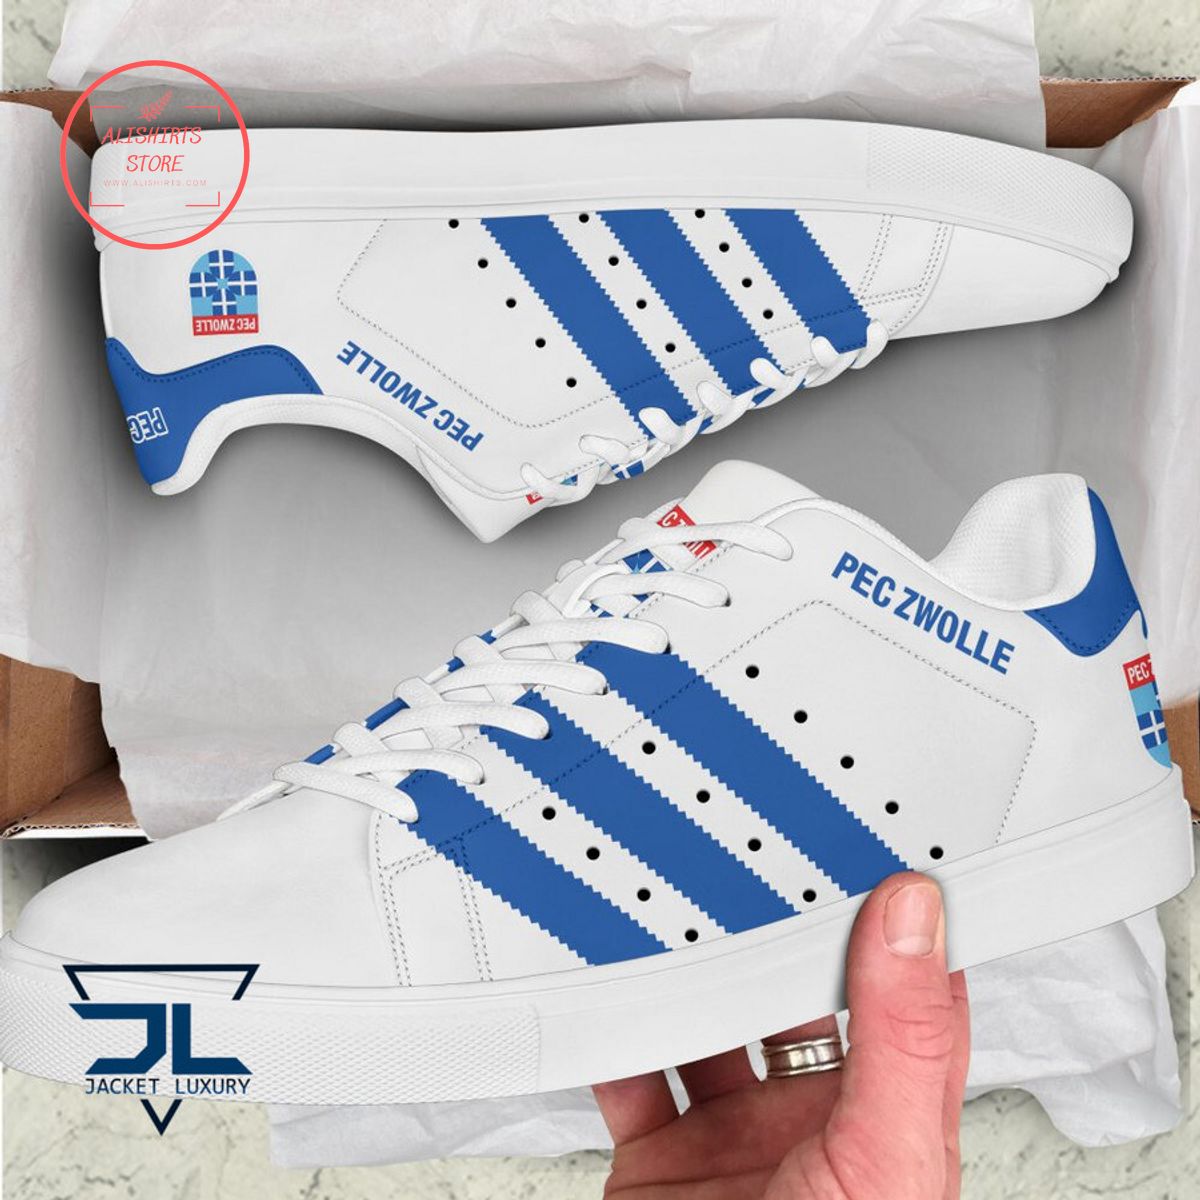 PEC Zwolle Stan Smith Shoes